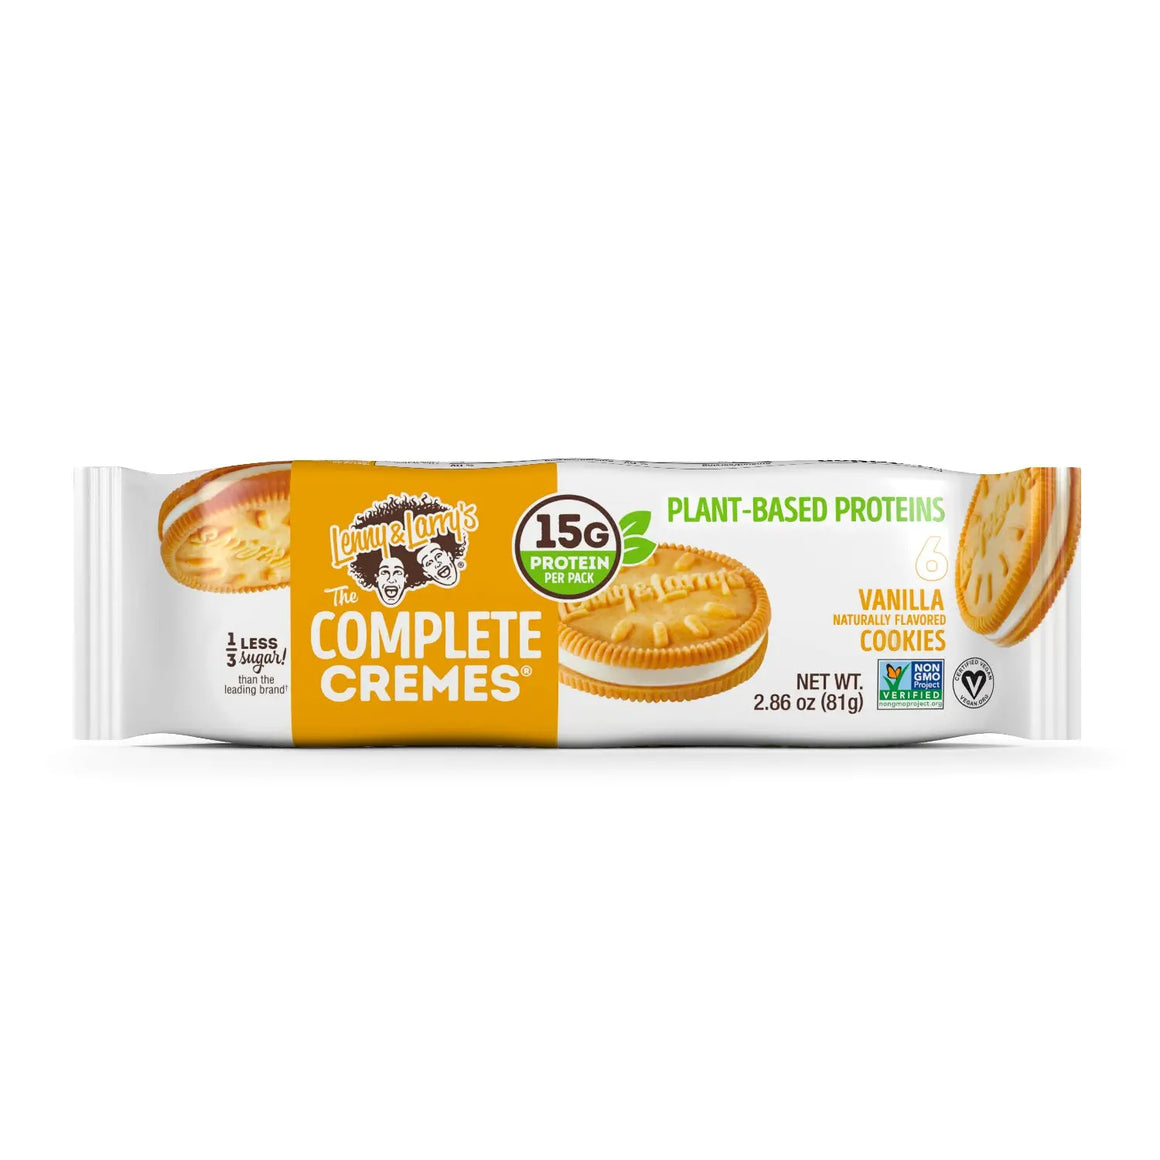 Lenny & Larry's Complete Cremes Vanilla Cookie, Plant Based Proteins ,Non GMO 81gm Lenny & Larry's